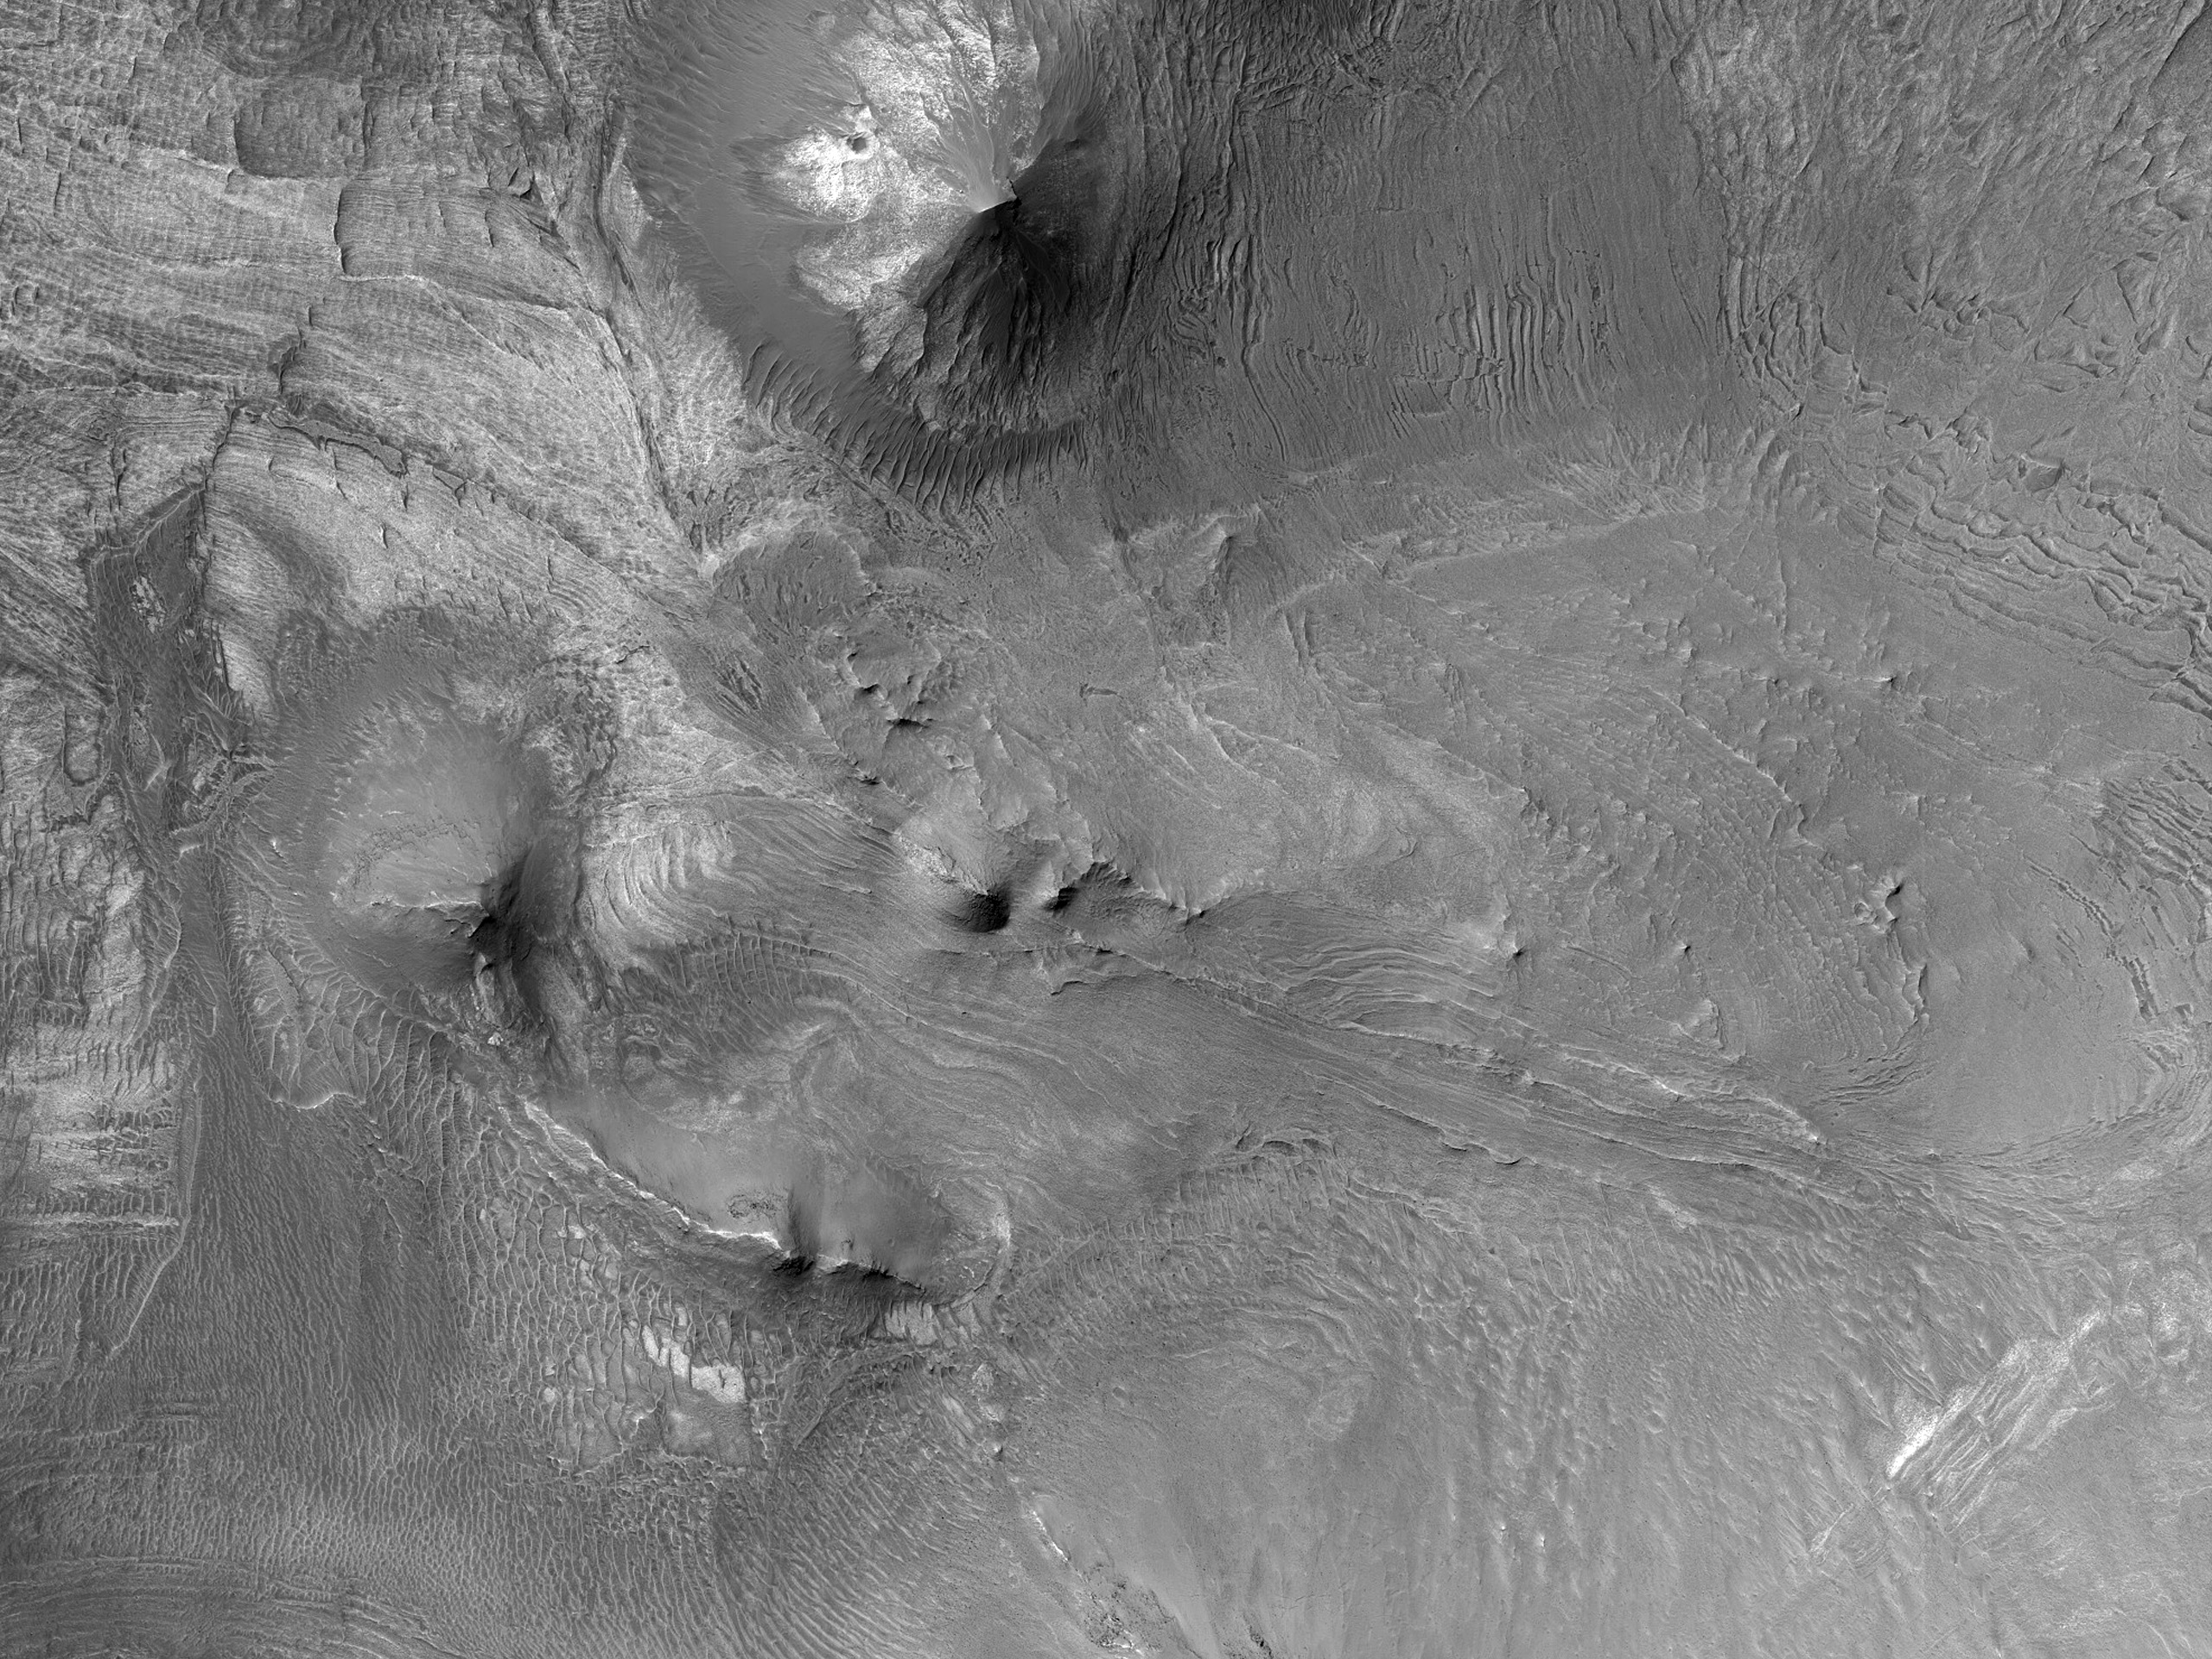 A Fault in Ius Chasma